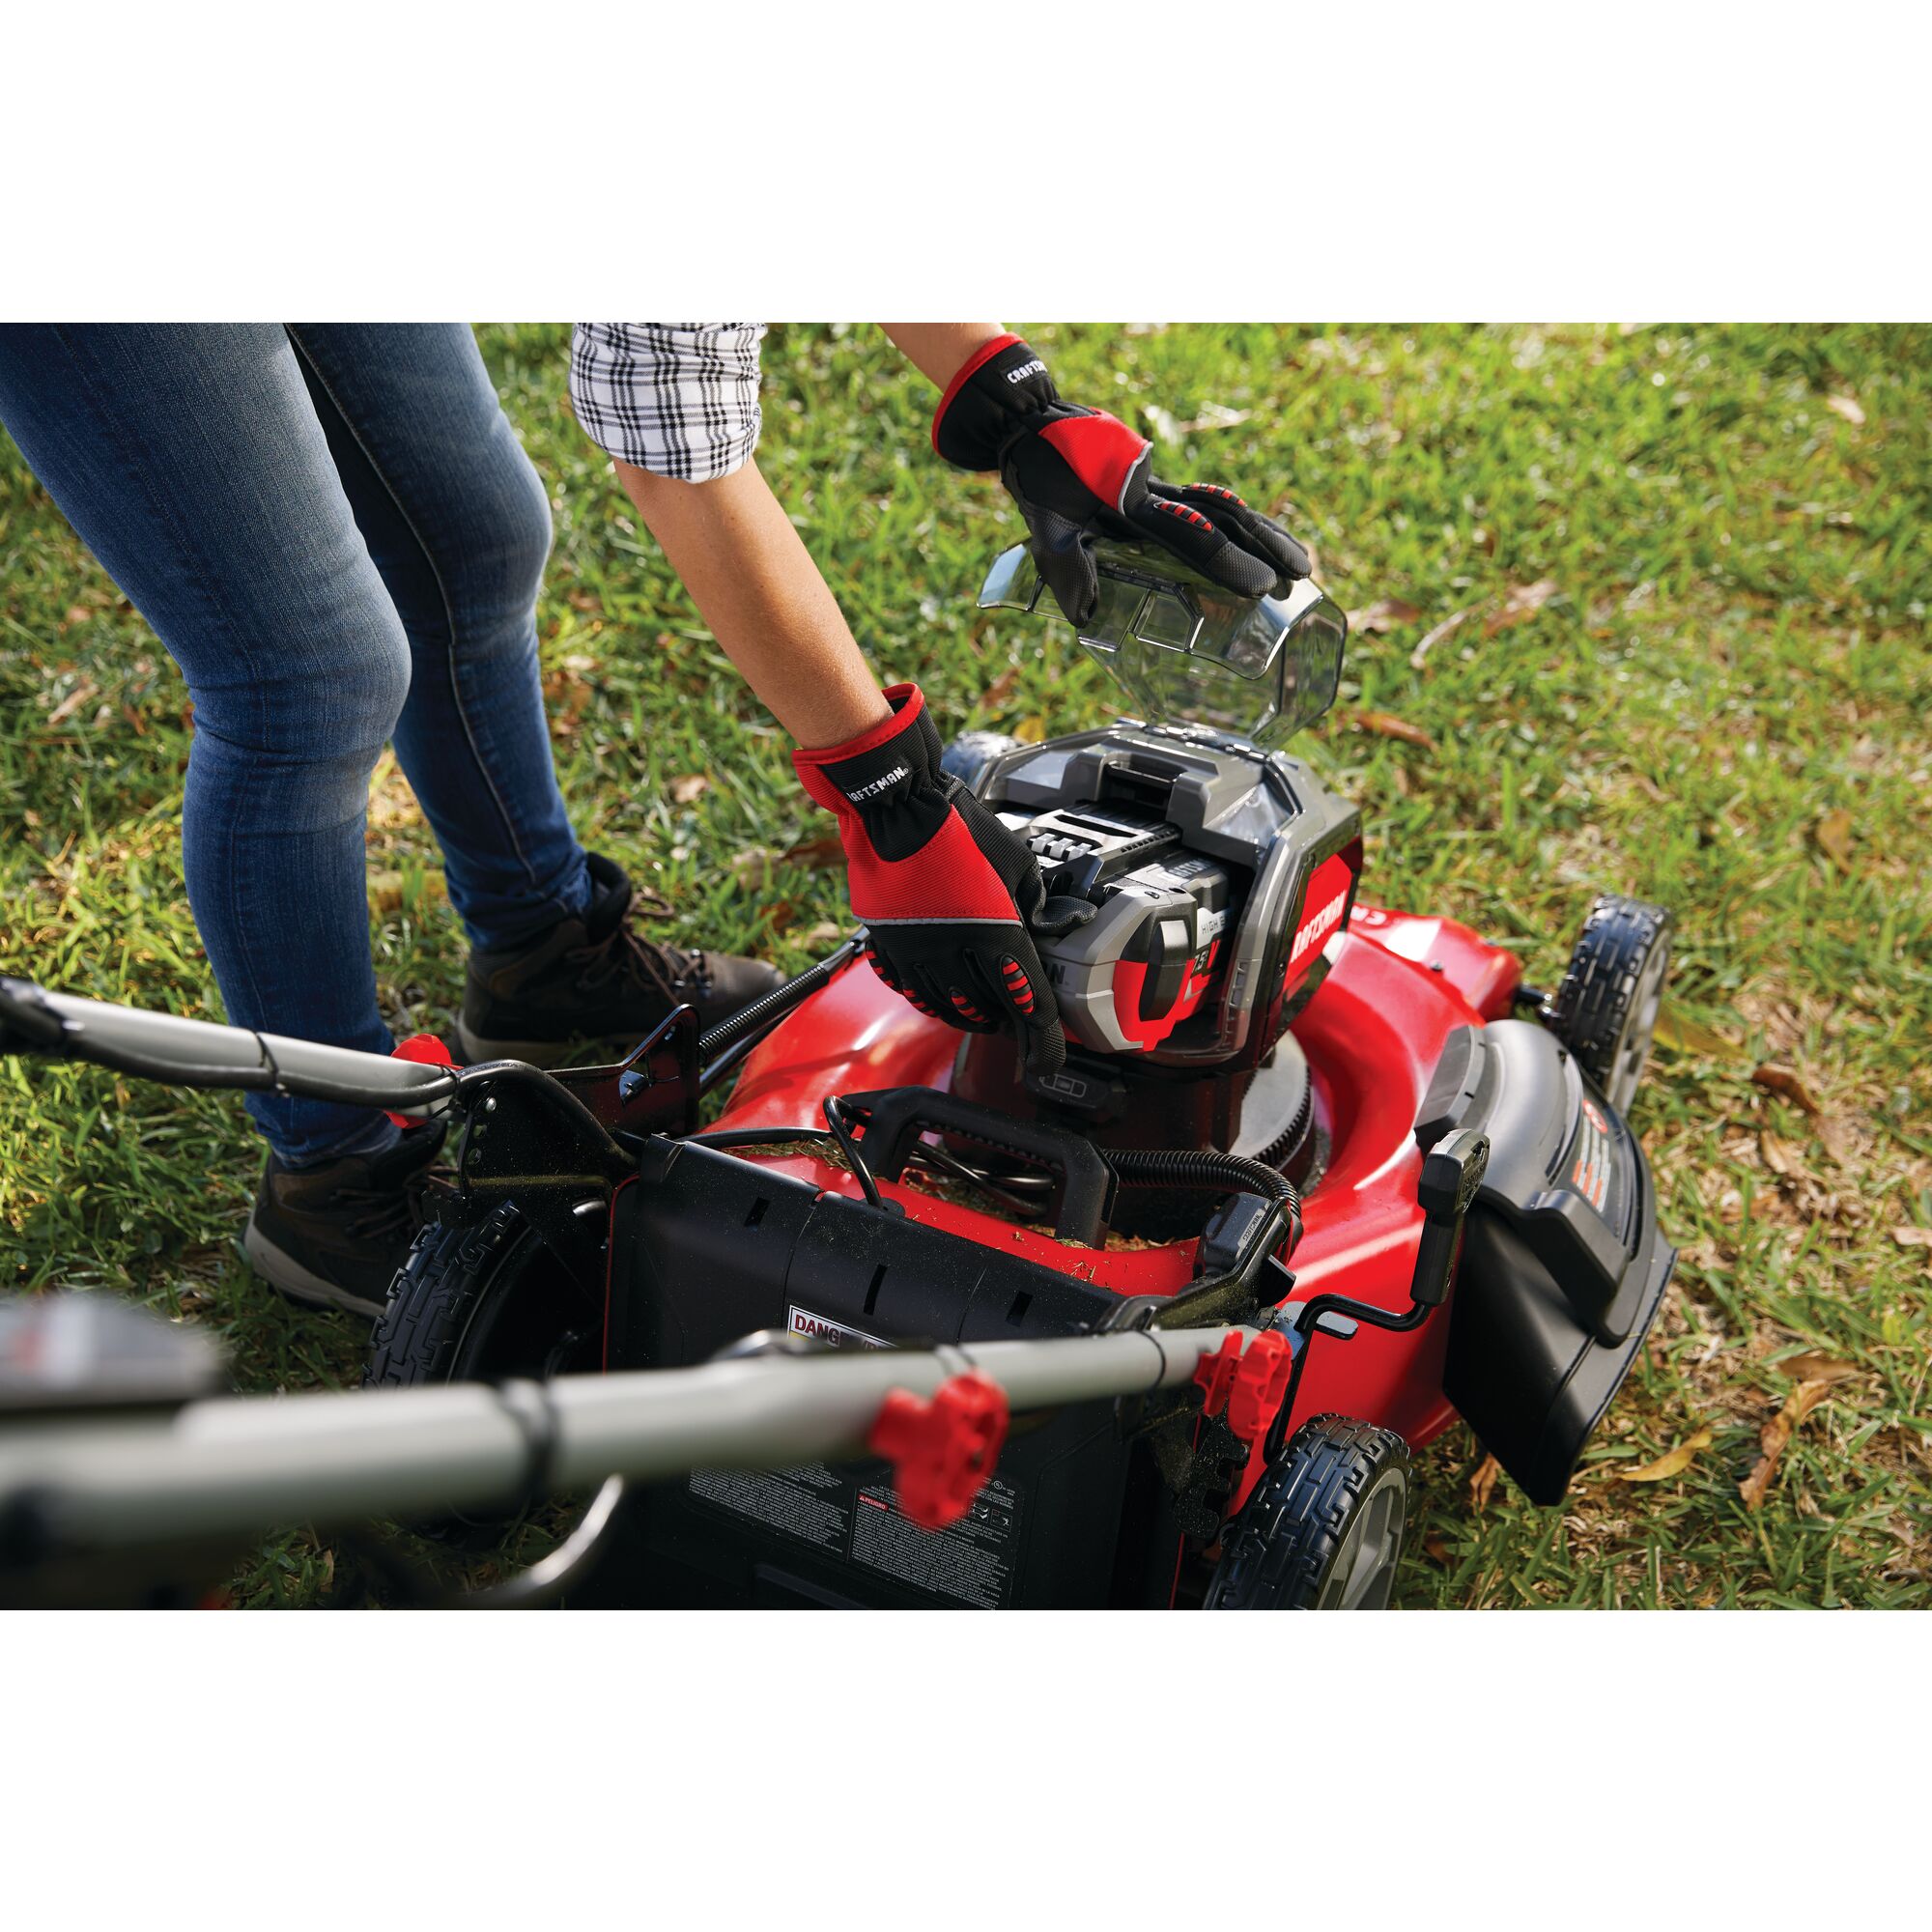 Volt 60 battery platform feature of volt 60 cordless 21 inch 3 in 1 self propelled lawn mower kit 7.5 Amp hour.